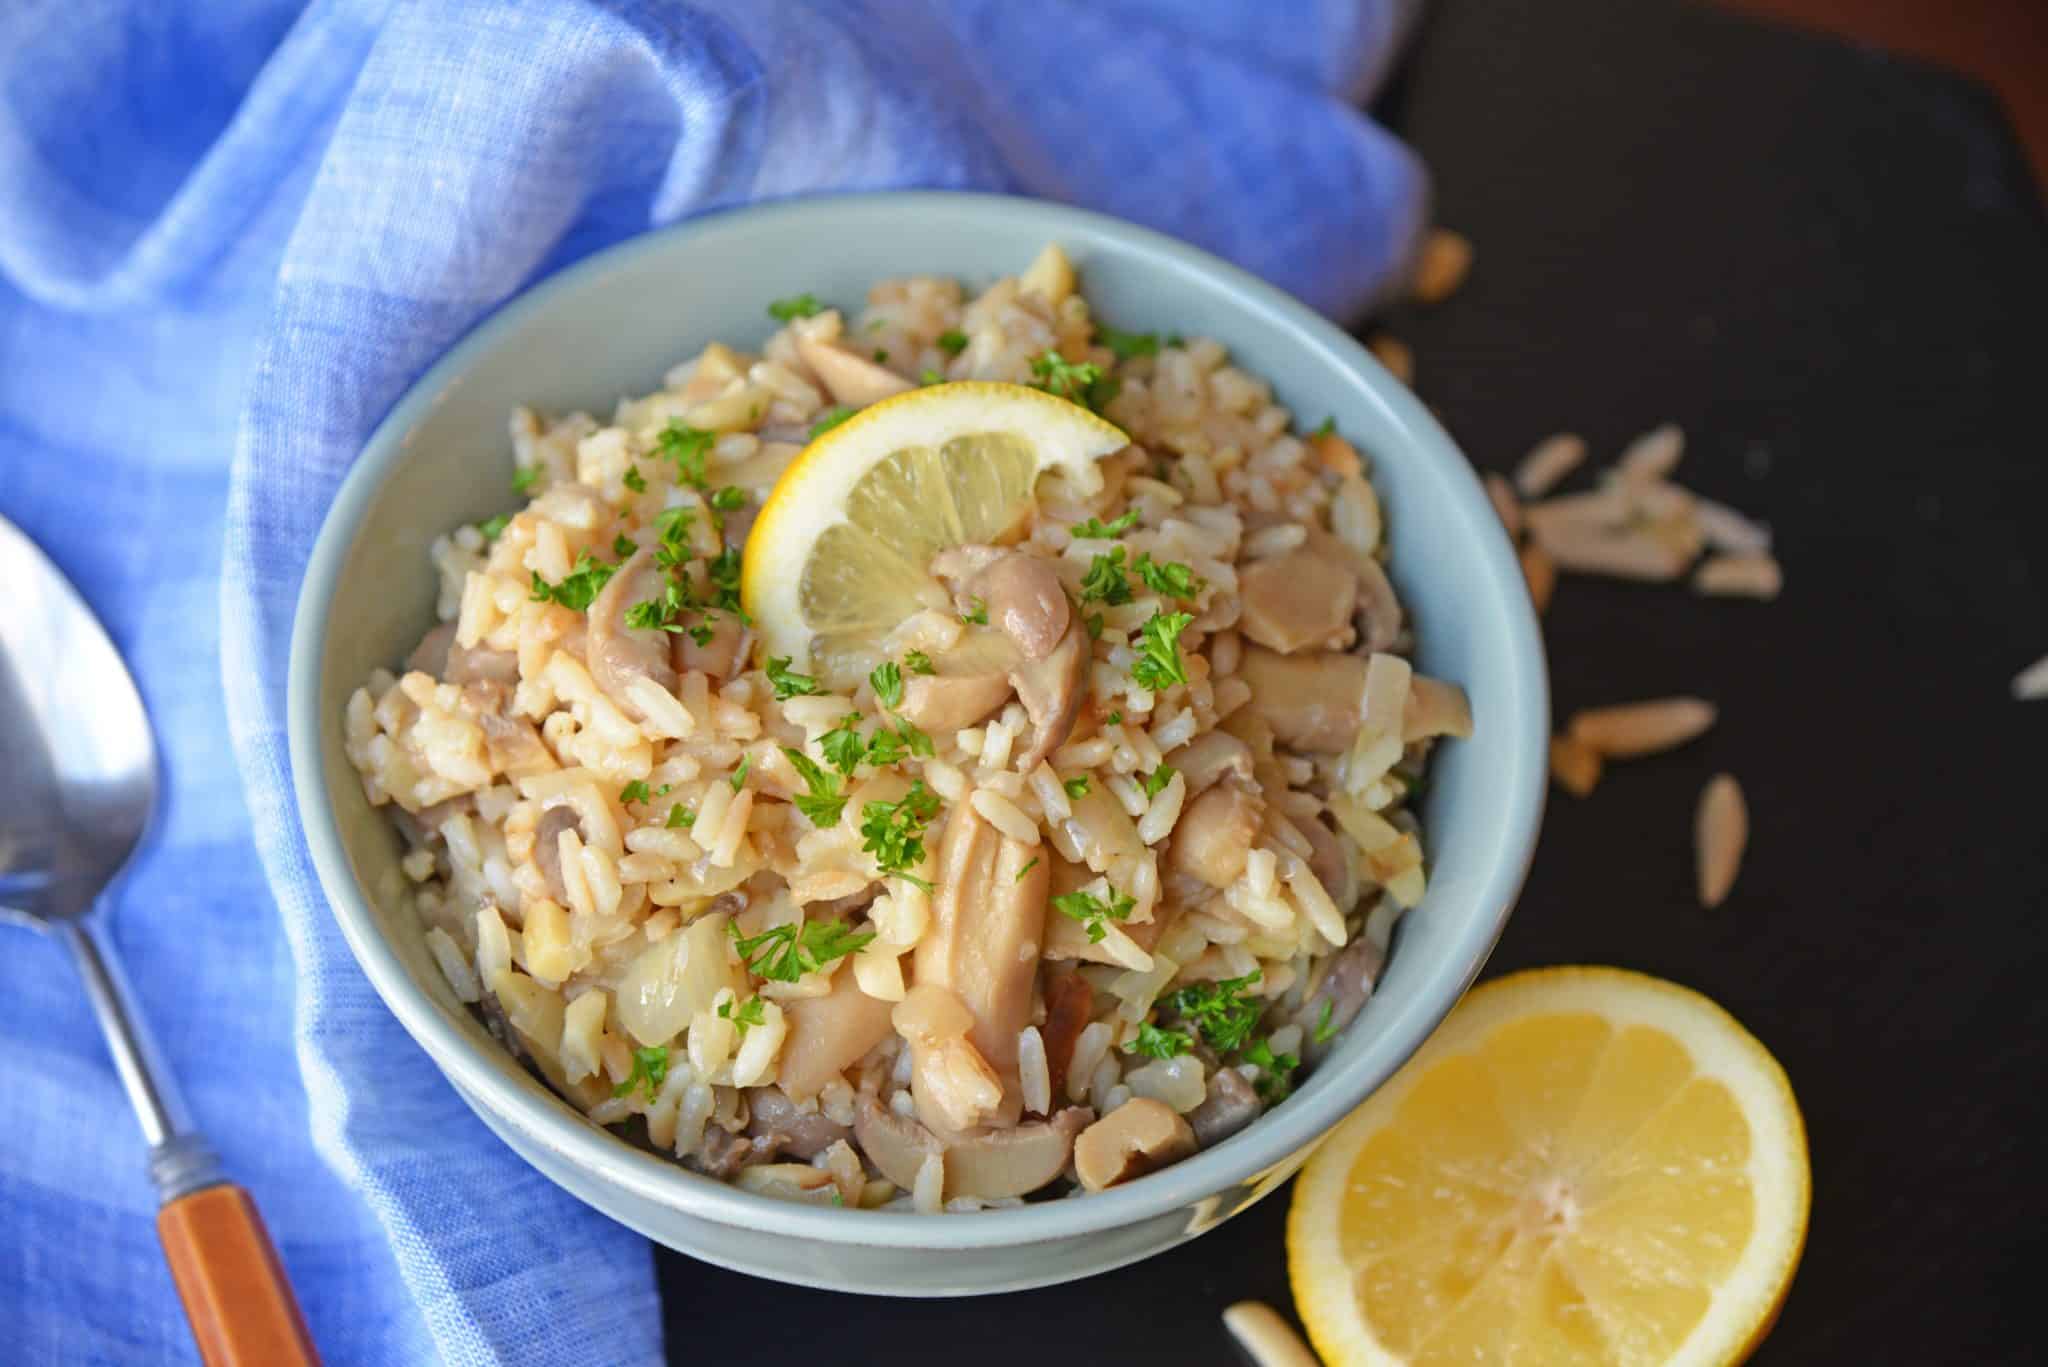 Almond Rice Pilaf is an easy side dish made with crunchy almonds, mushrooms and savory chicken broth and lemon juice to give it loads of flavor! An easy rice recipe the whole family will love. #ricepilafrecipe #easysidedish www.savoryexperiments.com 